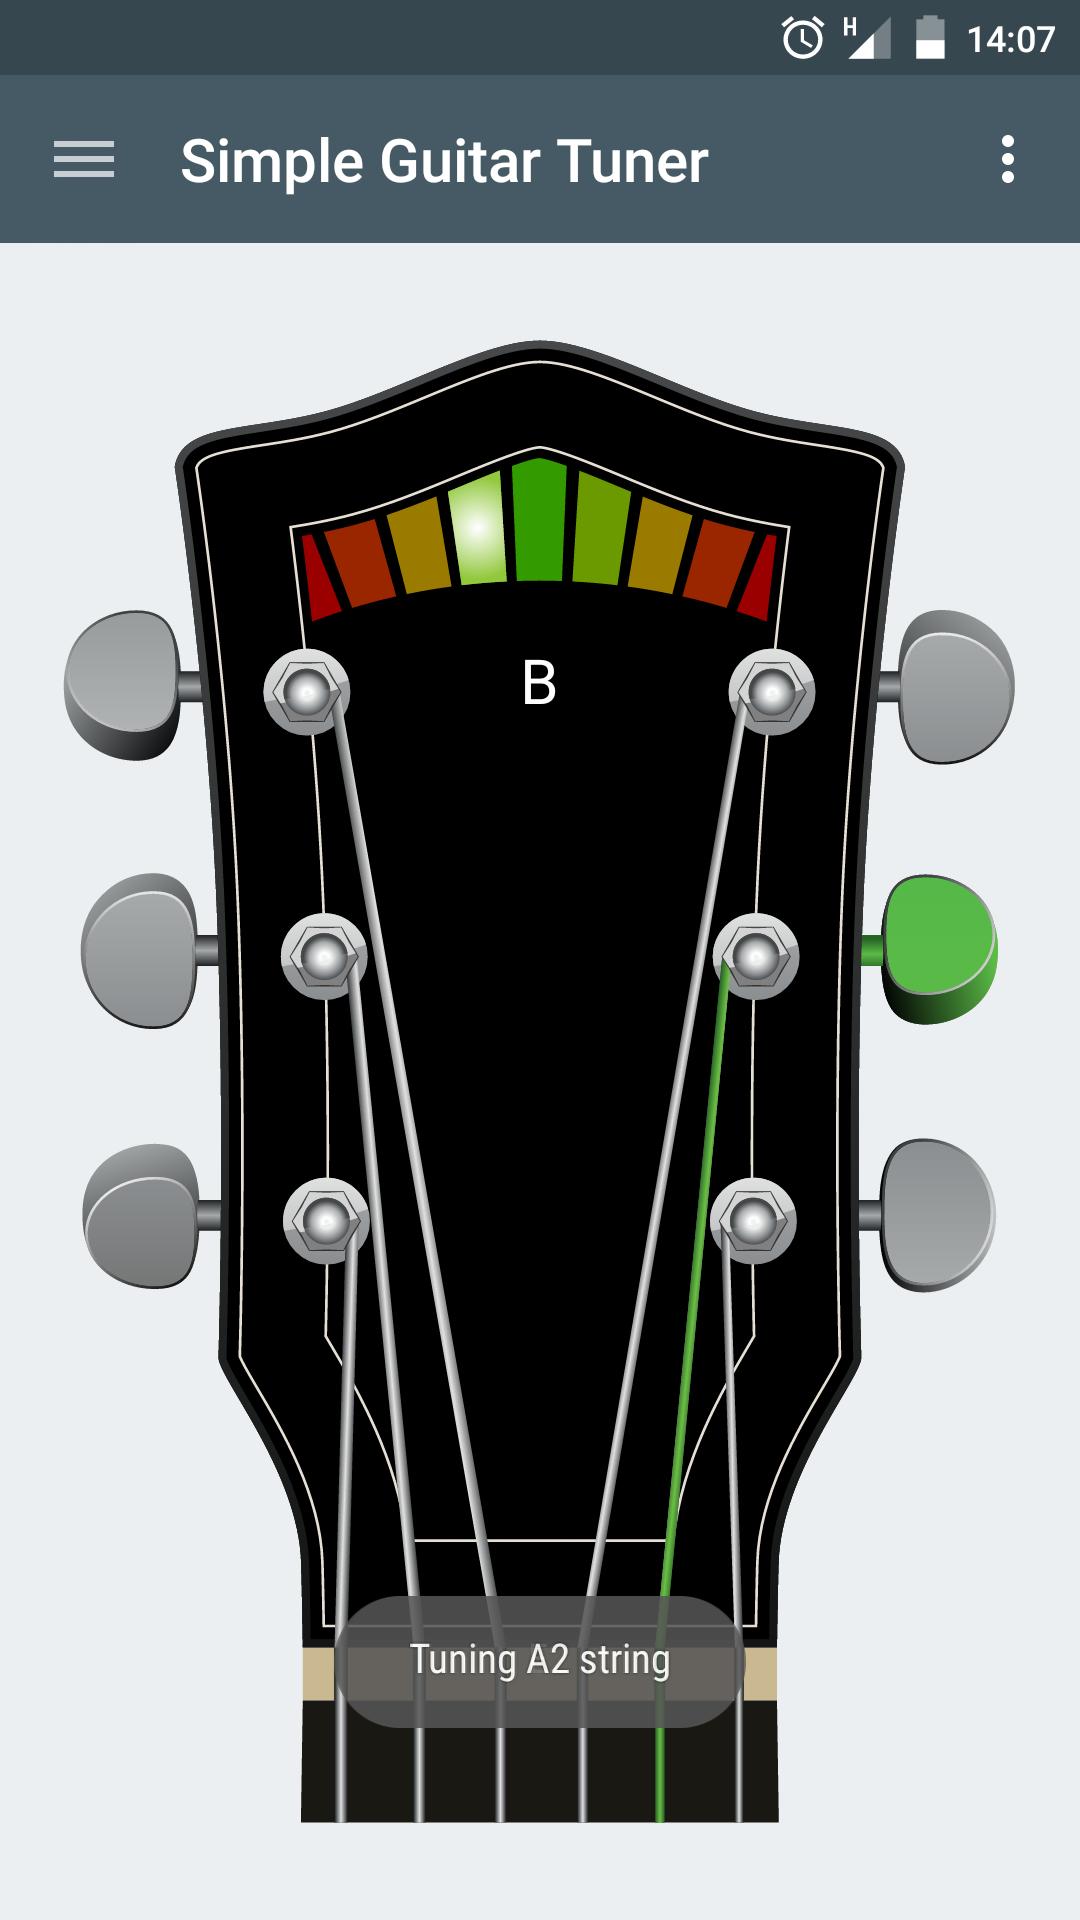 Simple Guitar Tuner for Android - APK Download